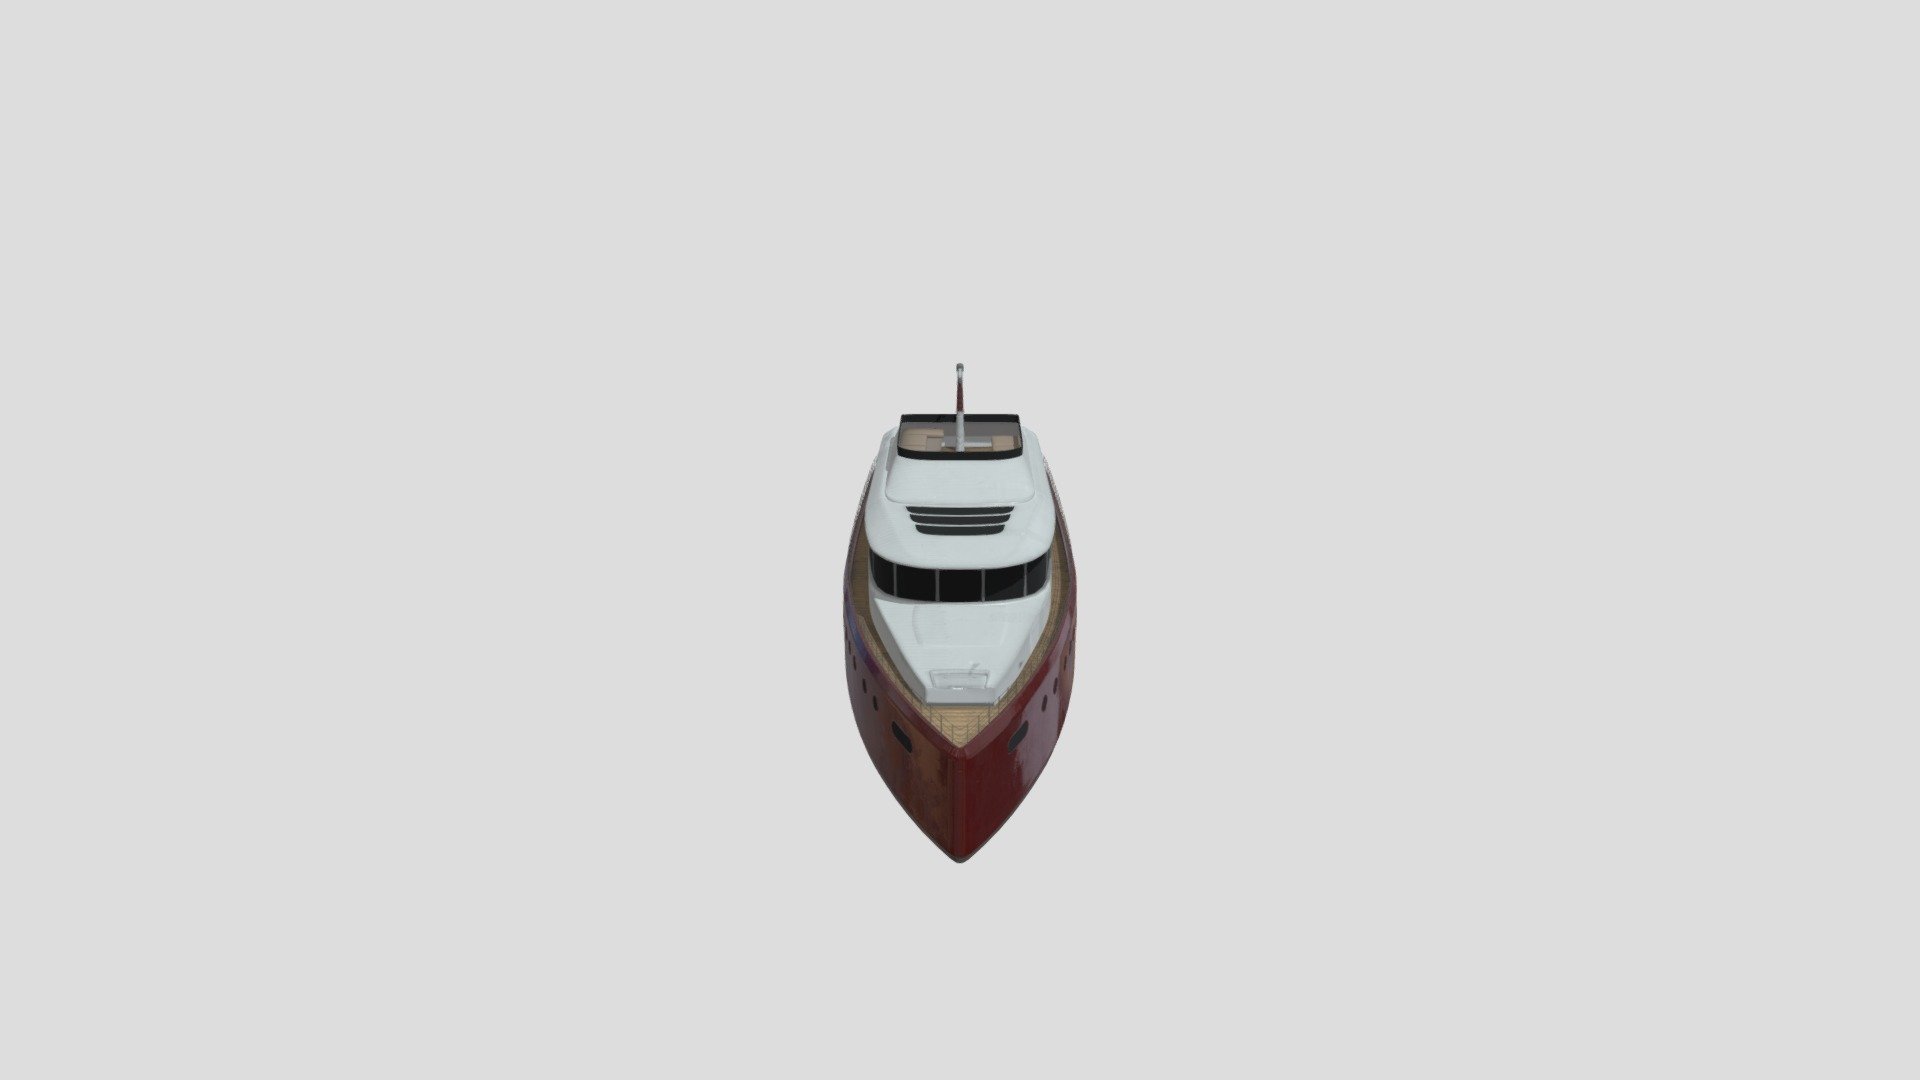 Professional, highly detailed 3d model of boat. Textures and materials are included. This model is ready to use in your visualizations 3d model